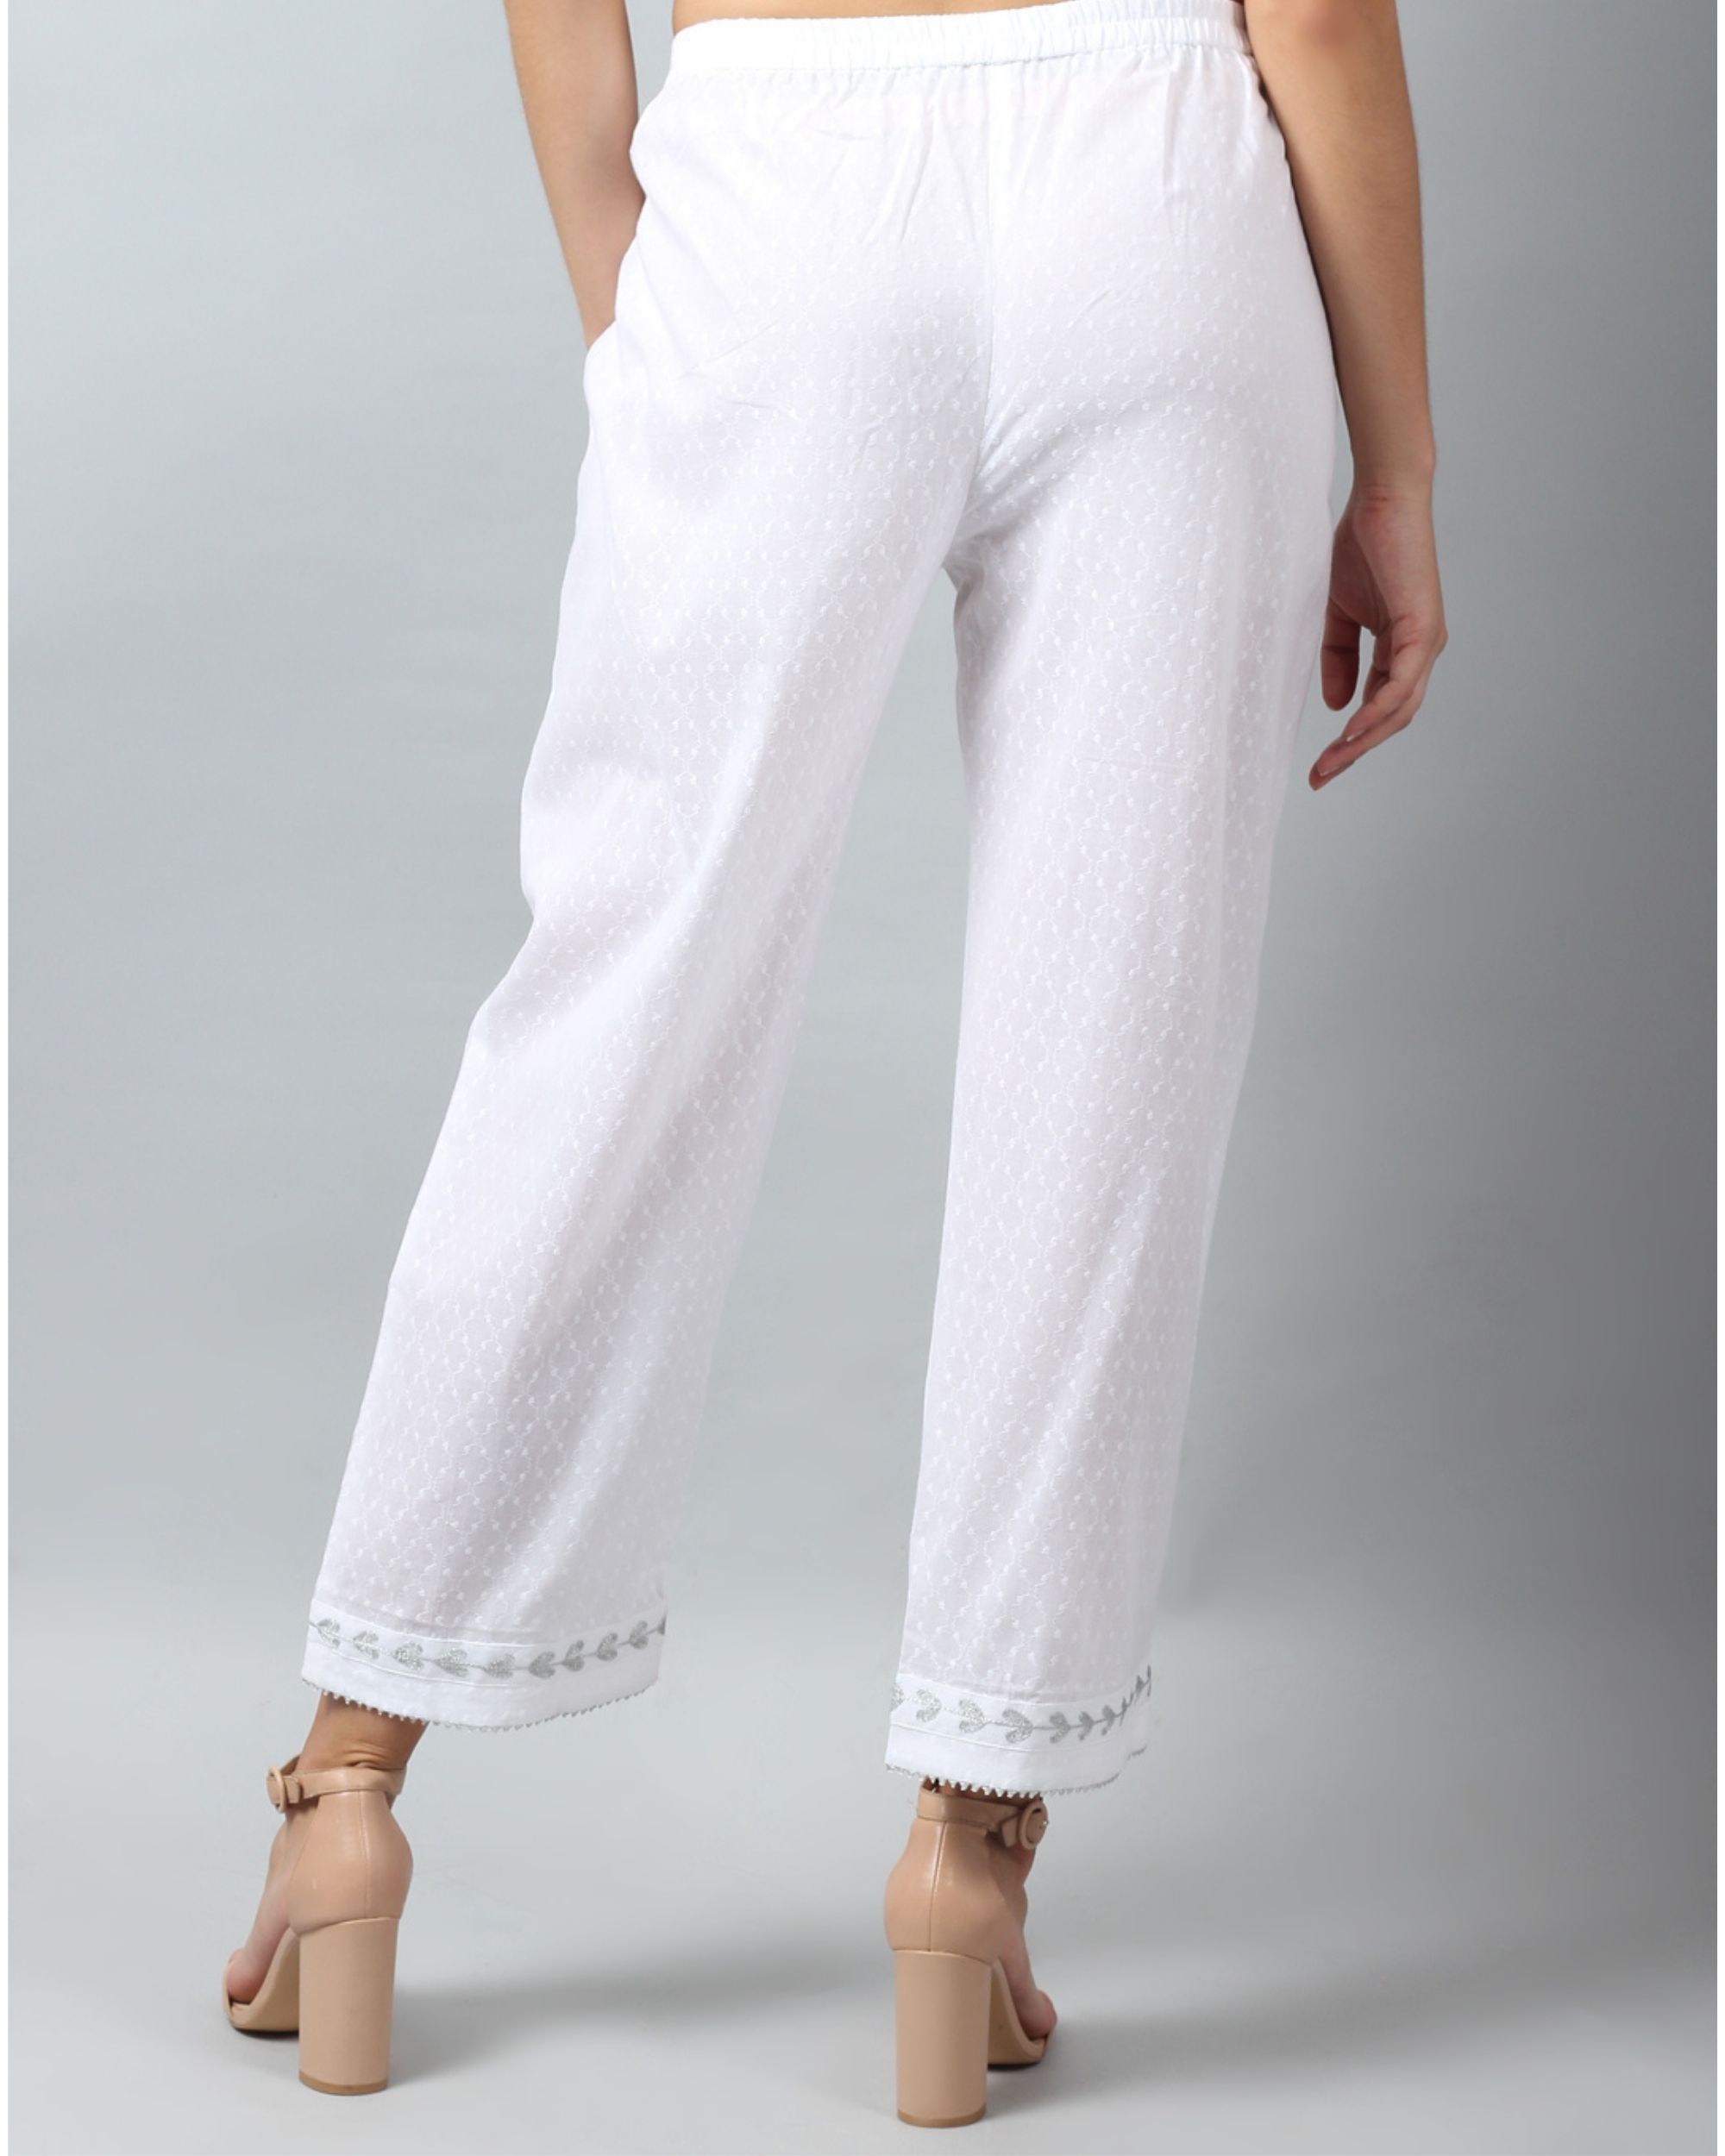 White embroidered pants by D'ART STUDIO | The Secret Label